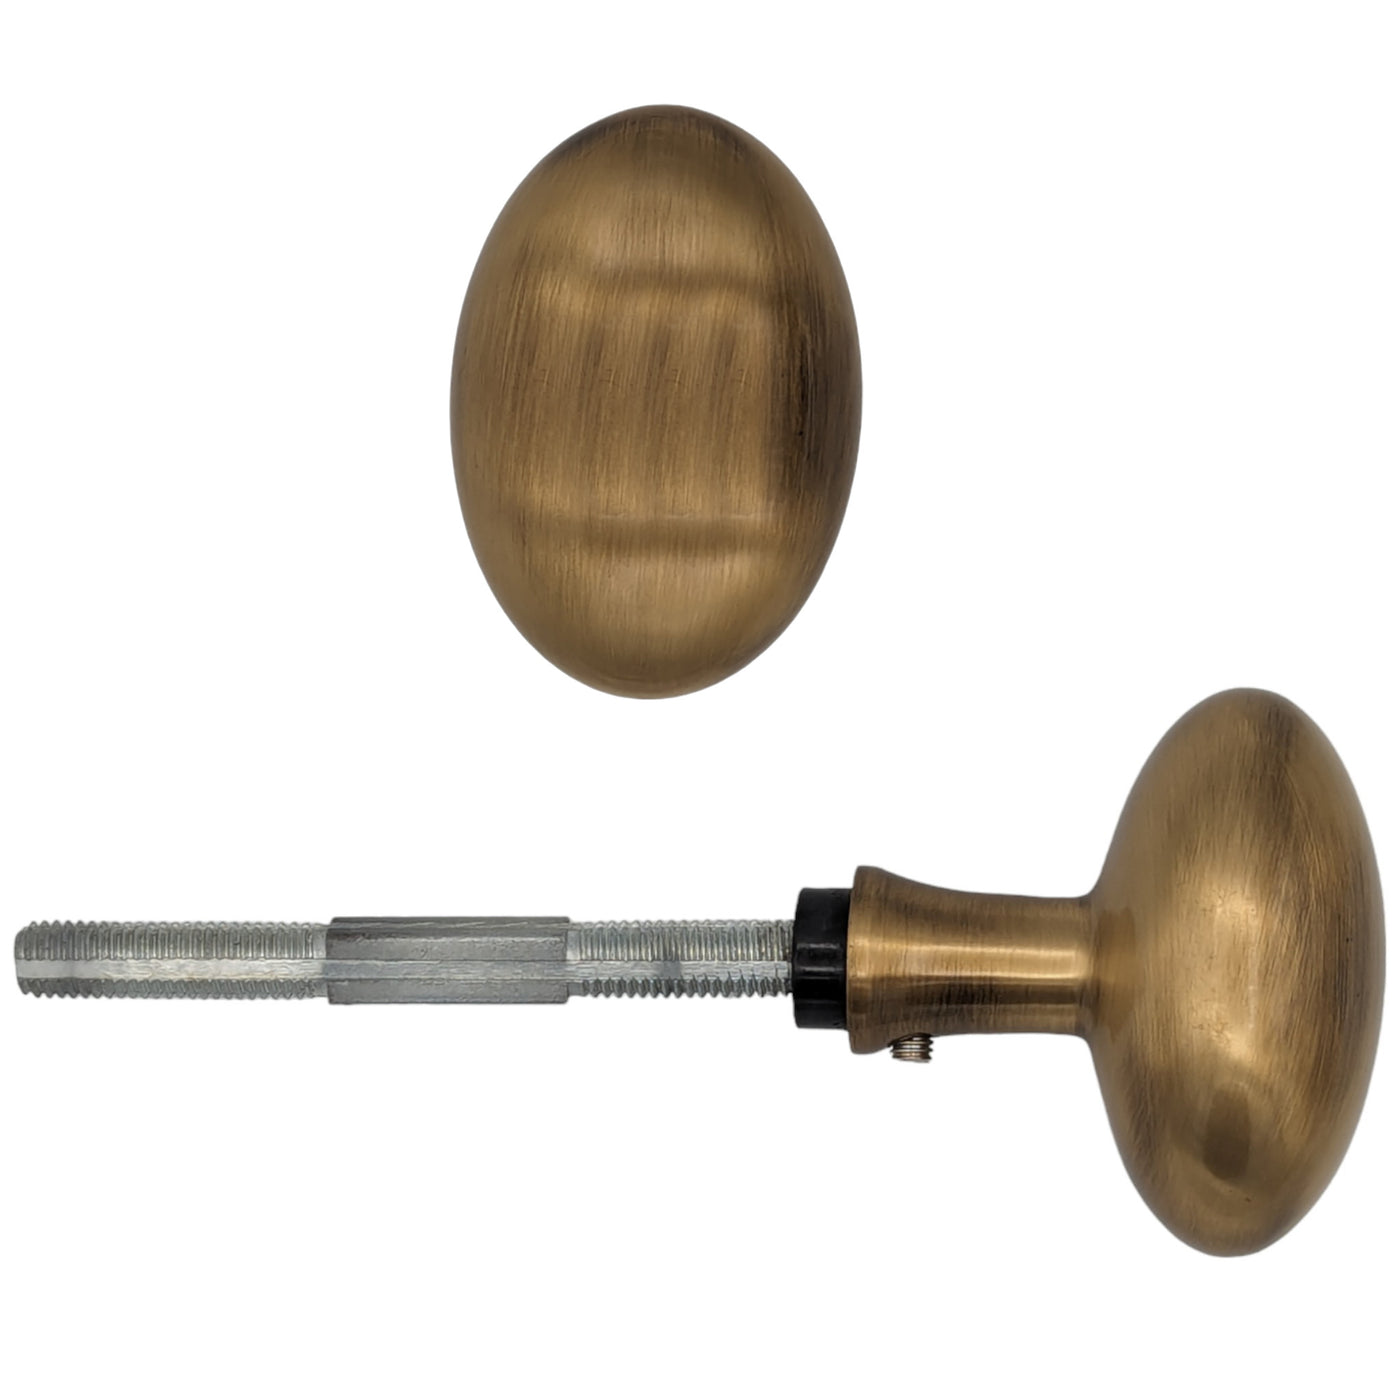 Solid Brass Egg Door Knobs Spare Set with Spindle (Several Finishes Available)